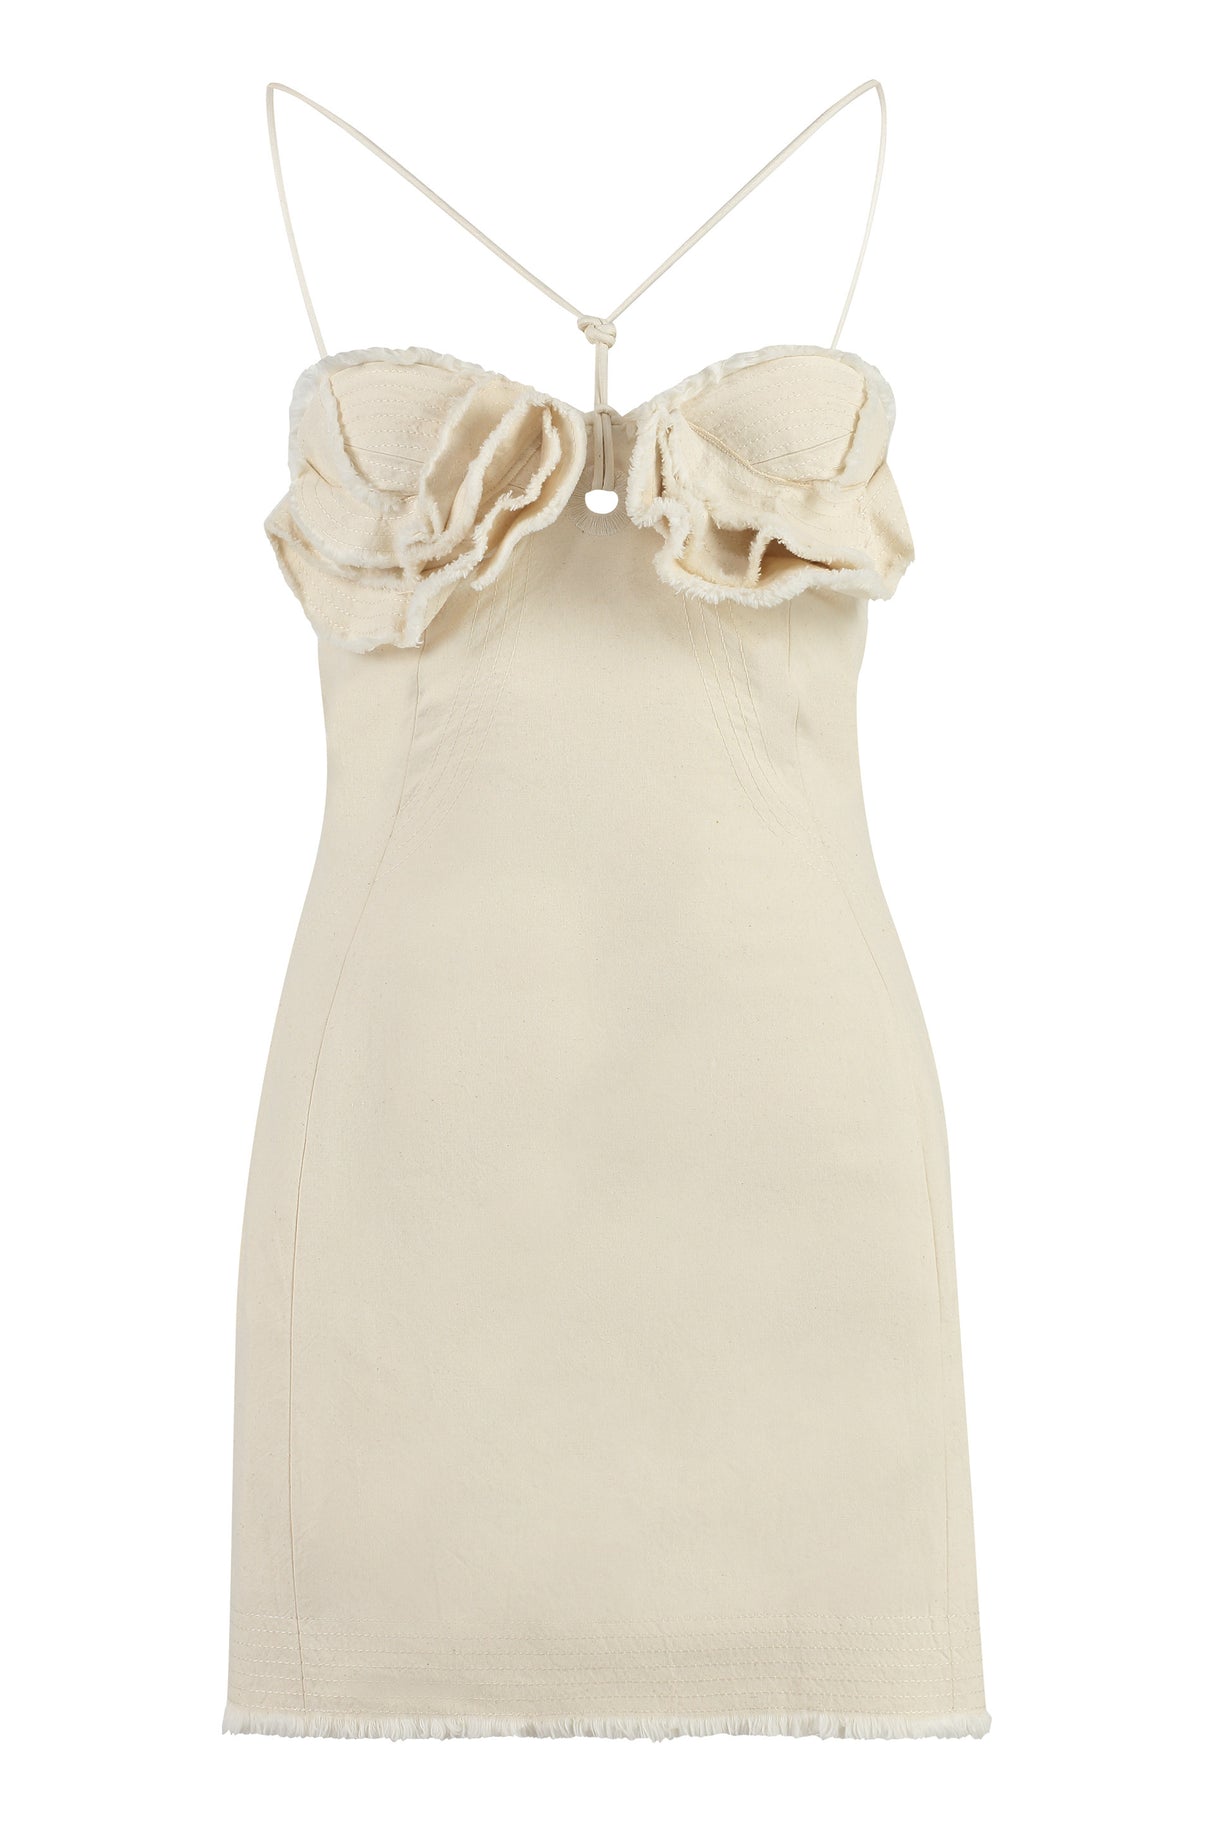 JACQUEMUS White Cotton Mini-Dress with Adjustable Straps and Ruffled Sweetheart Neckline for Women